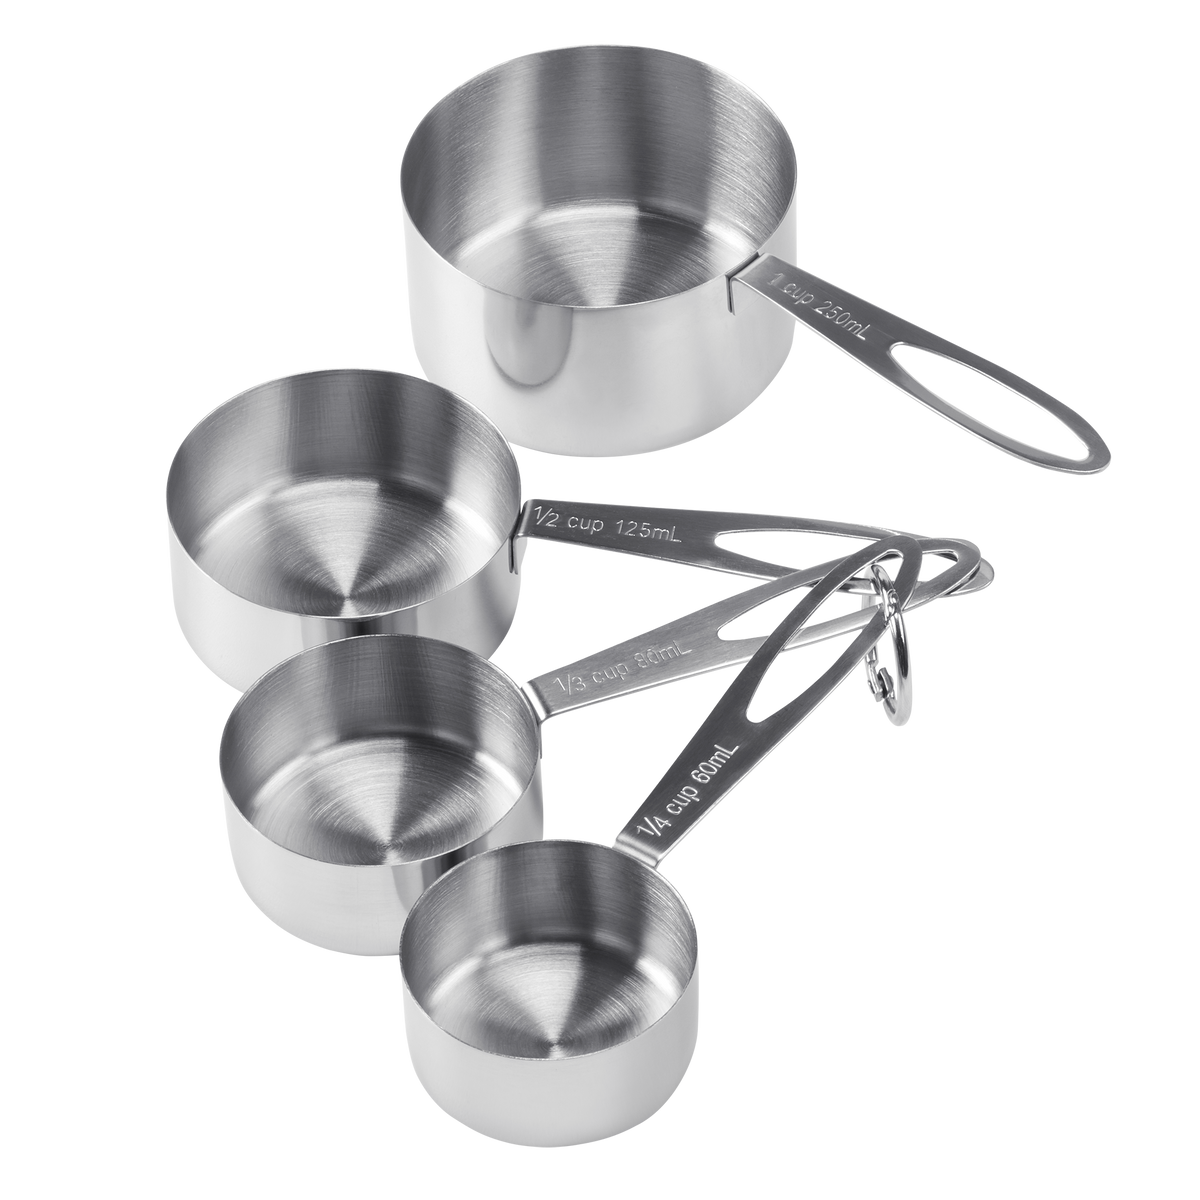 Product photo, showing all four sizes of stainless steel measuring cups.